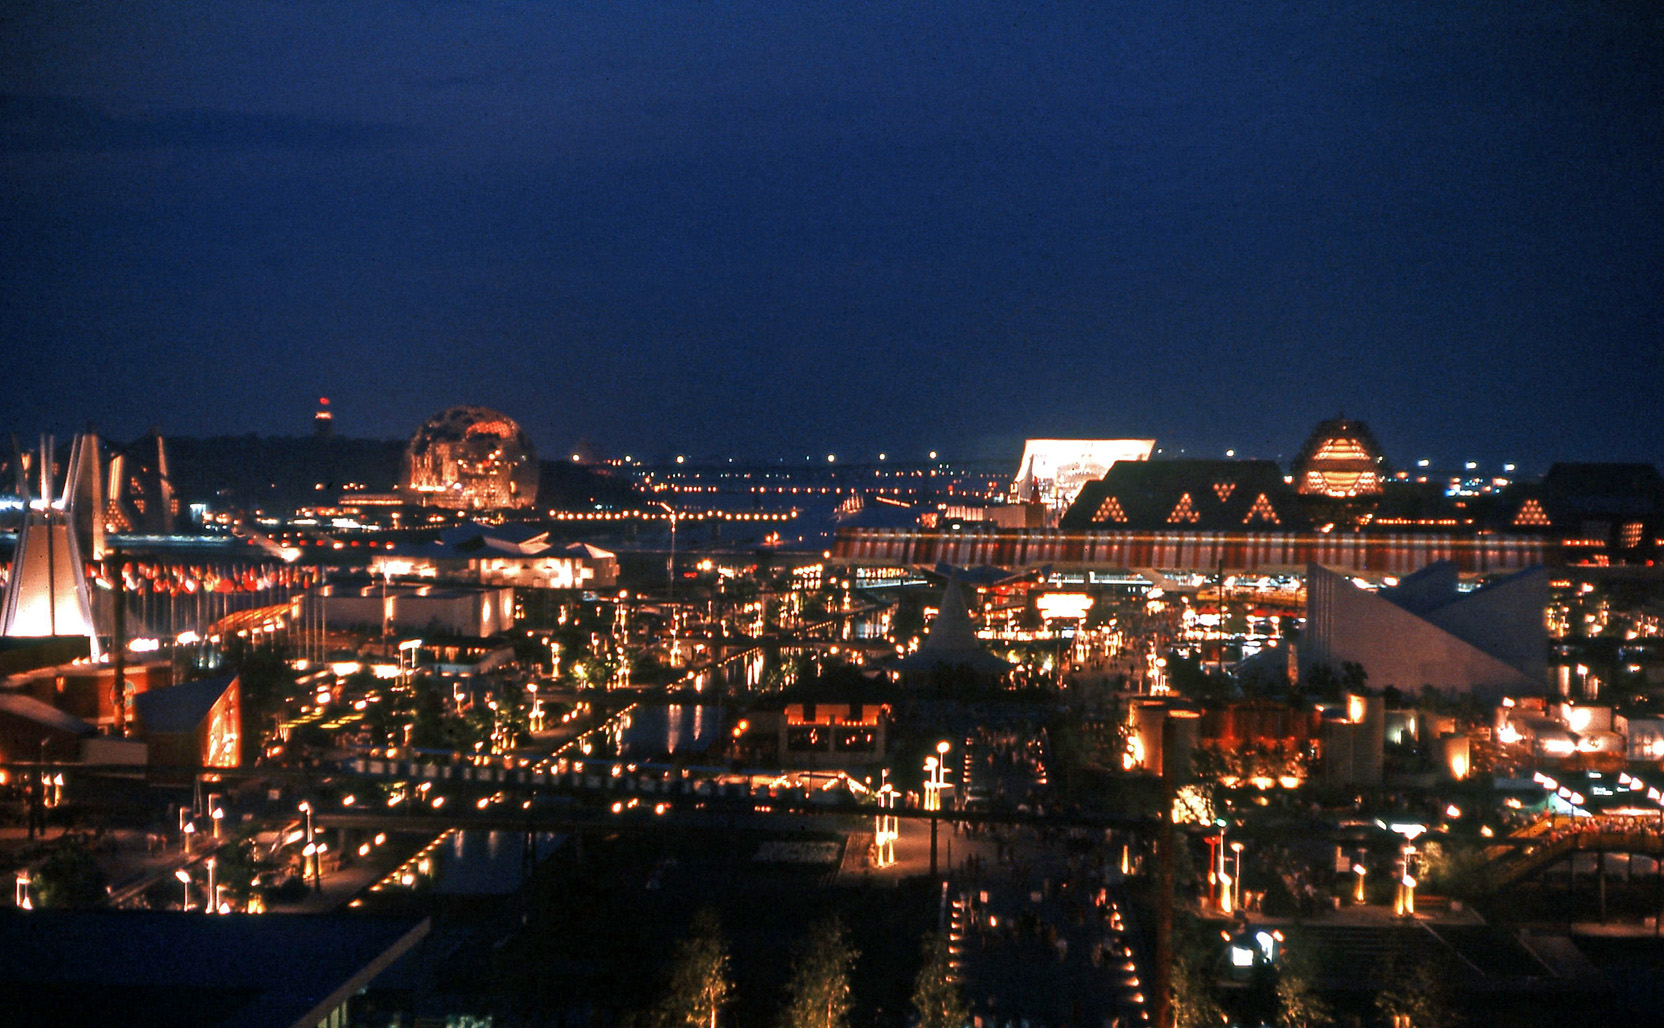 Montreal, 1967. This shot was taken using 35mm Kodachrome with the camera resting on a railing. In the distance, the U.S. pavilion is the Buckminster Fuller dome on the left while the U.S.S.R. pavilion is the brightly-lit dipping roof building on the right. Today, the U.S. pavilion still stands as an indoor arboretum. View full size.